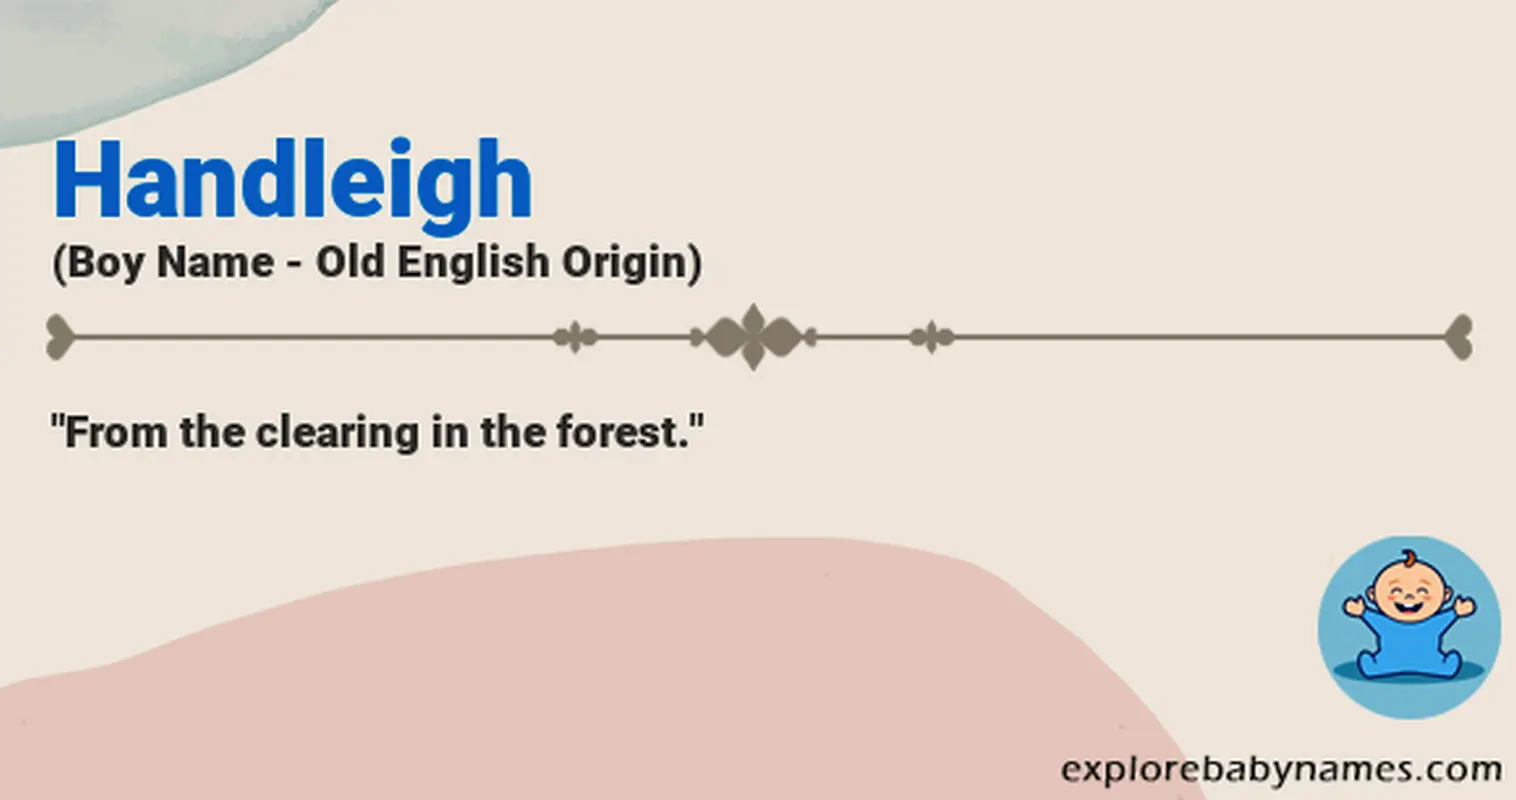 Meaning of Handleigh